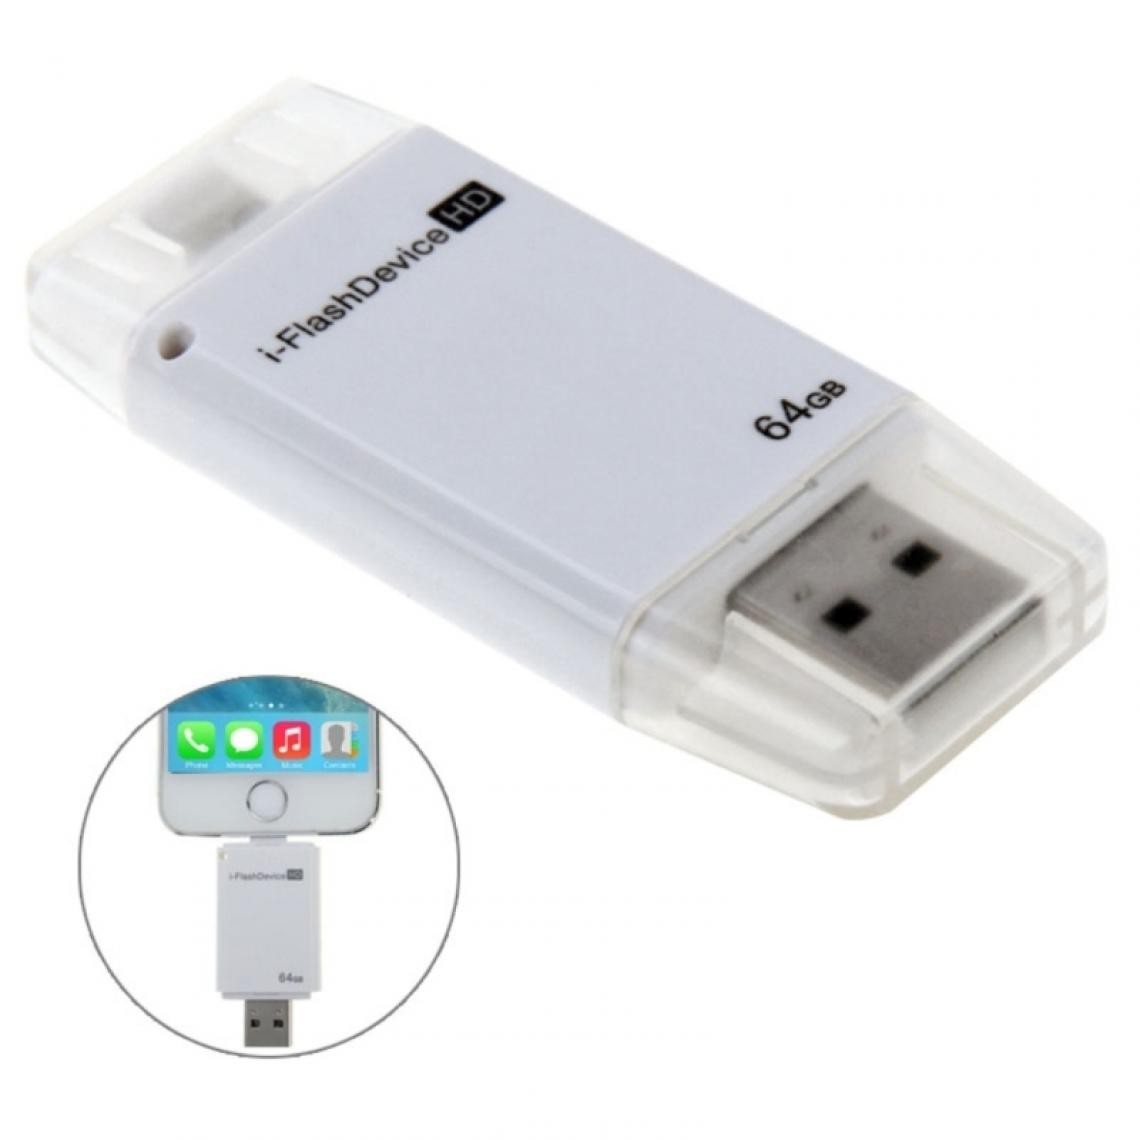 Wewoo - Clé USB blanc pour iPhone / iPad / iPod touch / / touch 64 Go i-Flash pilote HD U disque USB Memory Stick, - Clavier